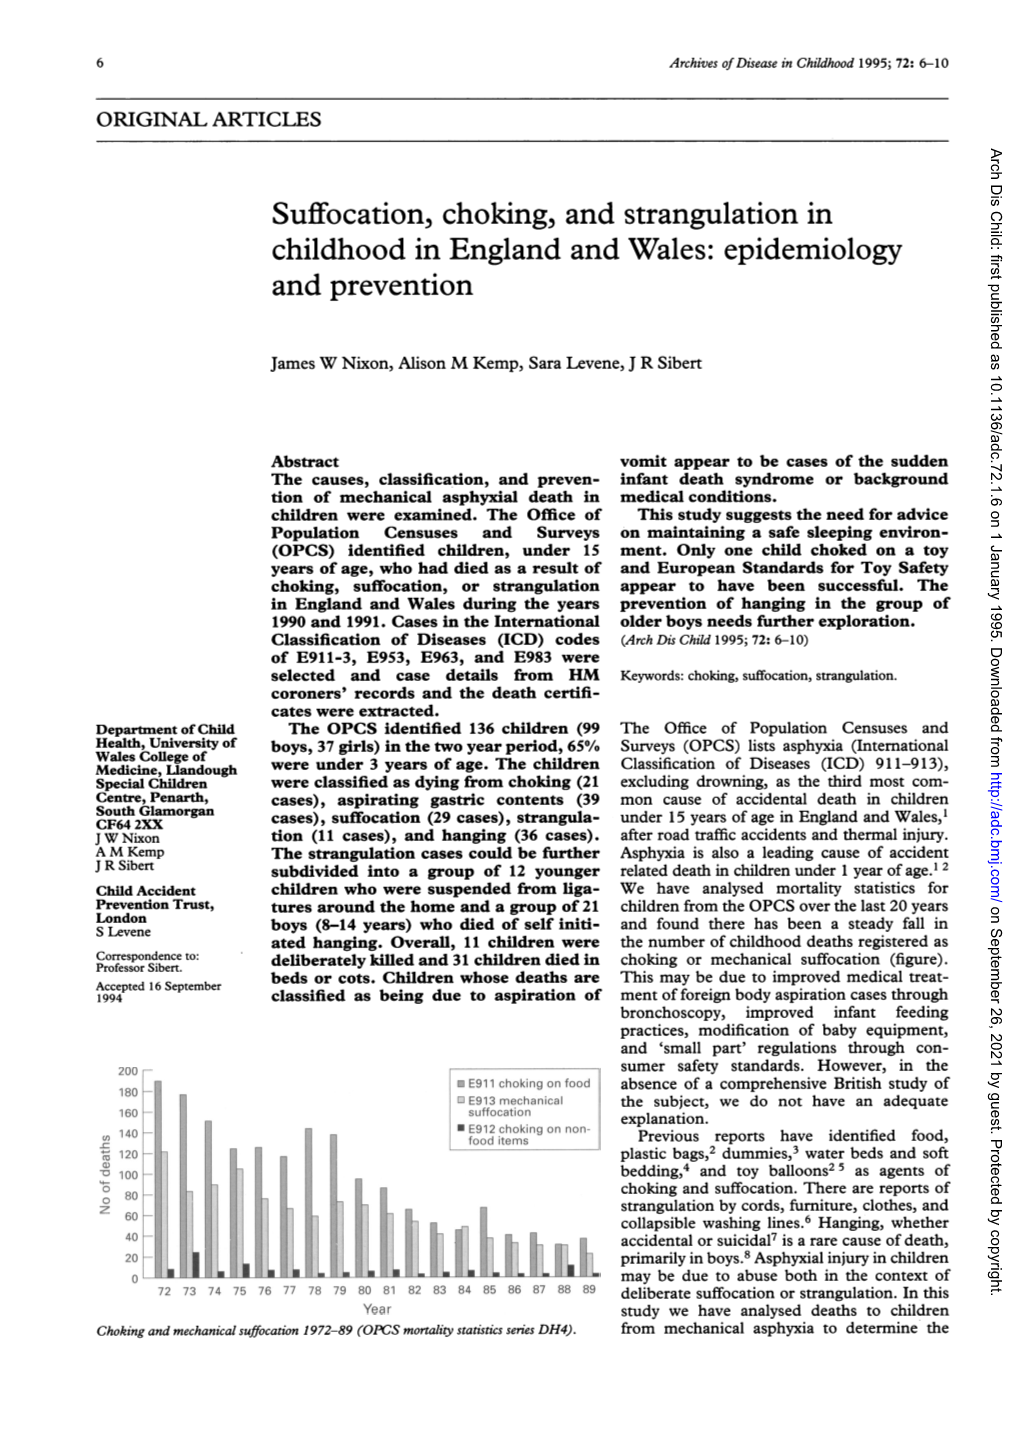 Suffocation, Choking, and Strangulation in Childhood in England and Wales: Epidemiology and Prevention